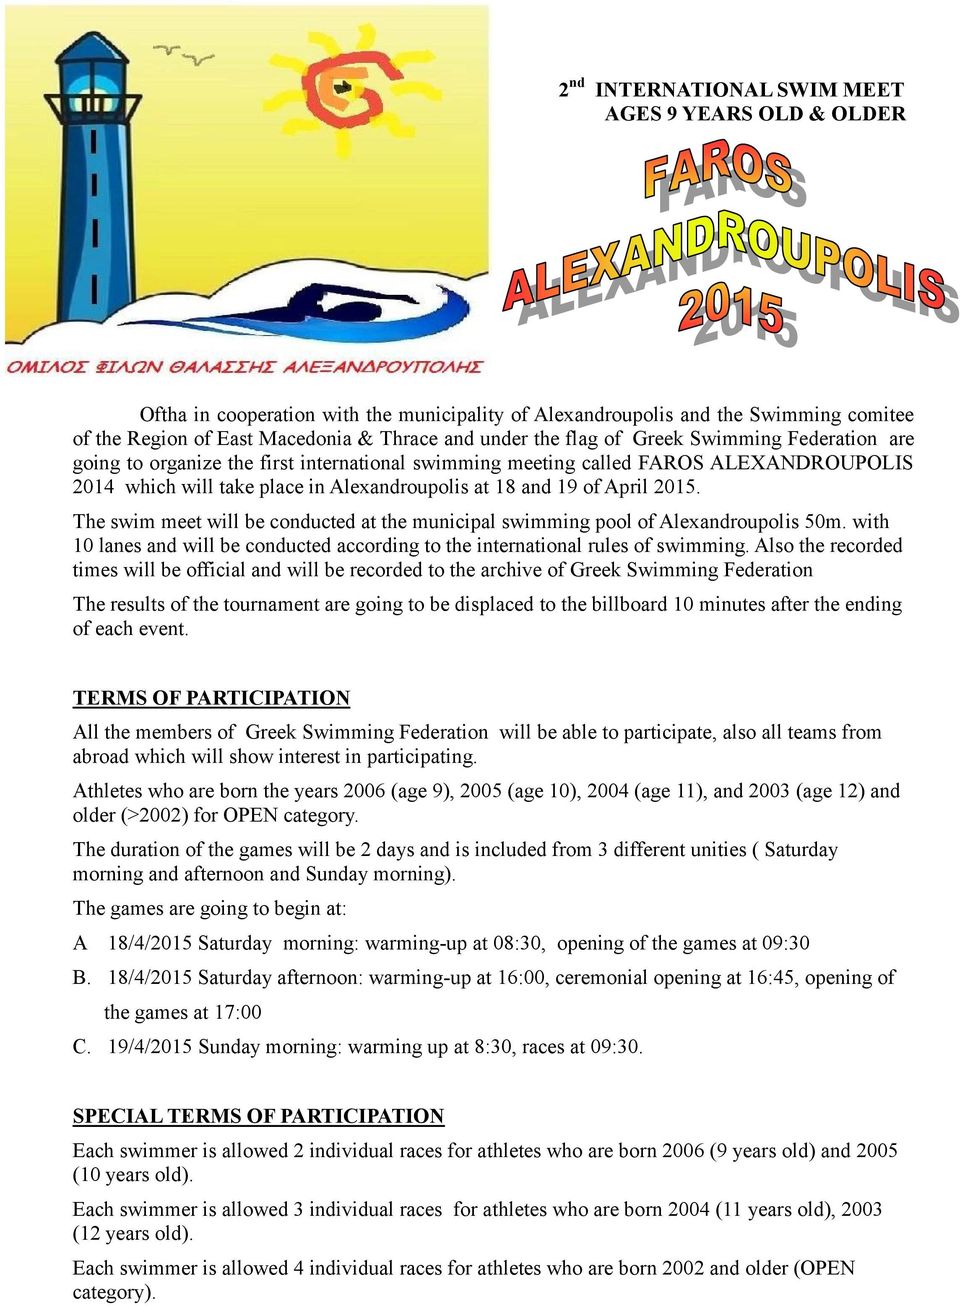 The swim meet will be conducted at the municipal swimming pool of Alexandroupolis 50m. with 10 lanes and will be conducted according to the international rules of swimming.